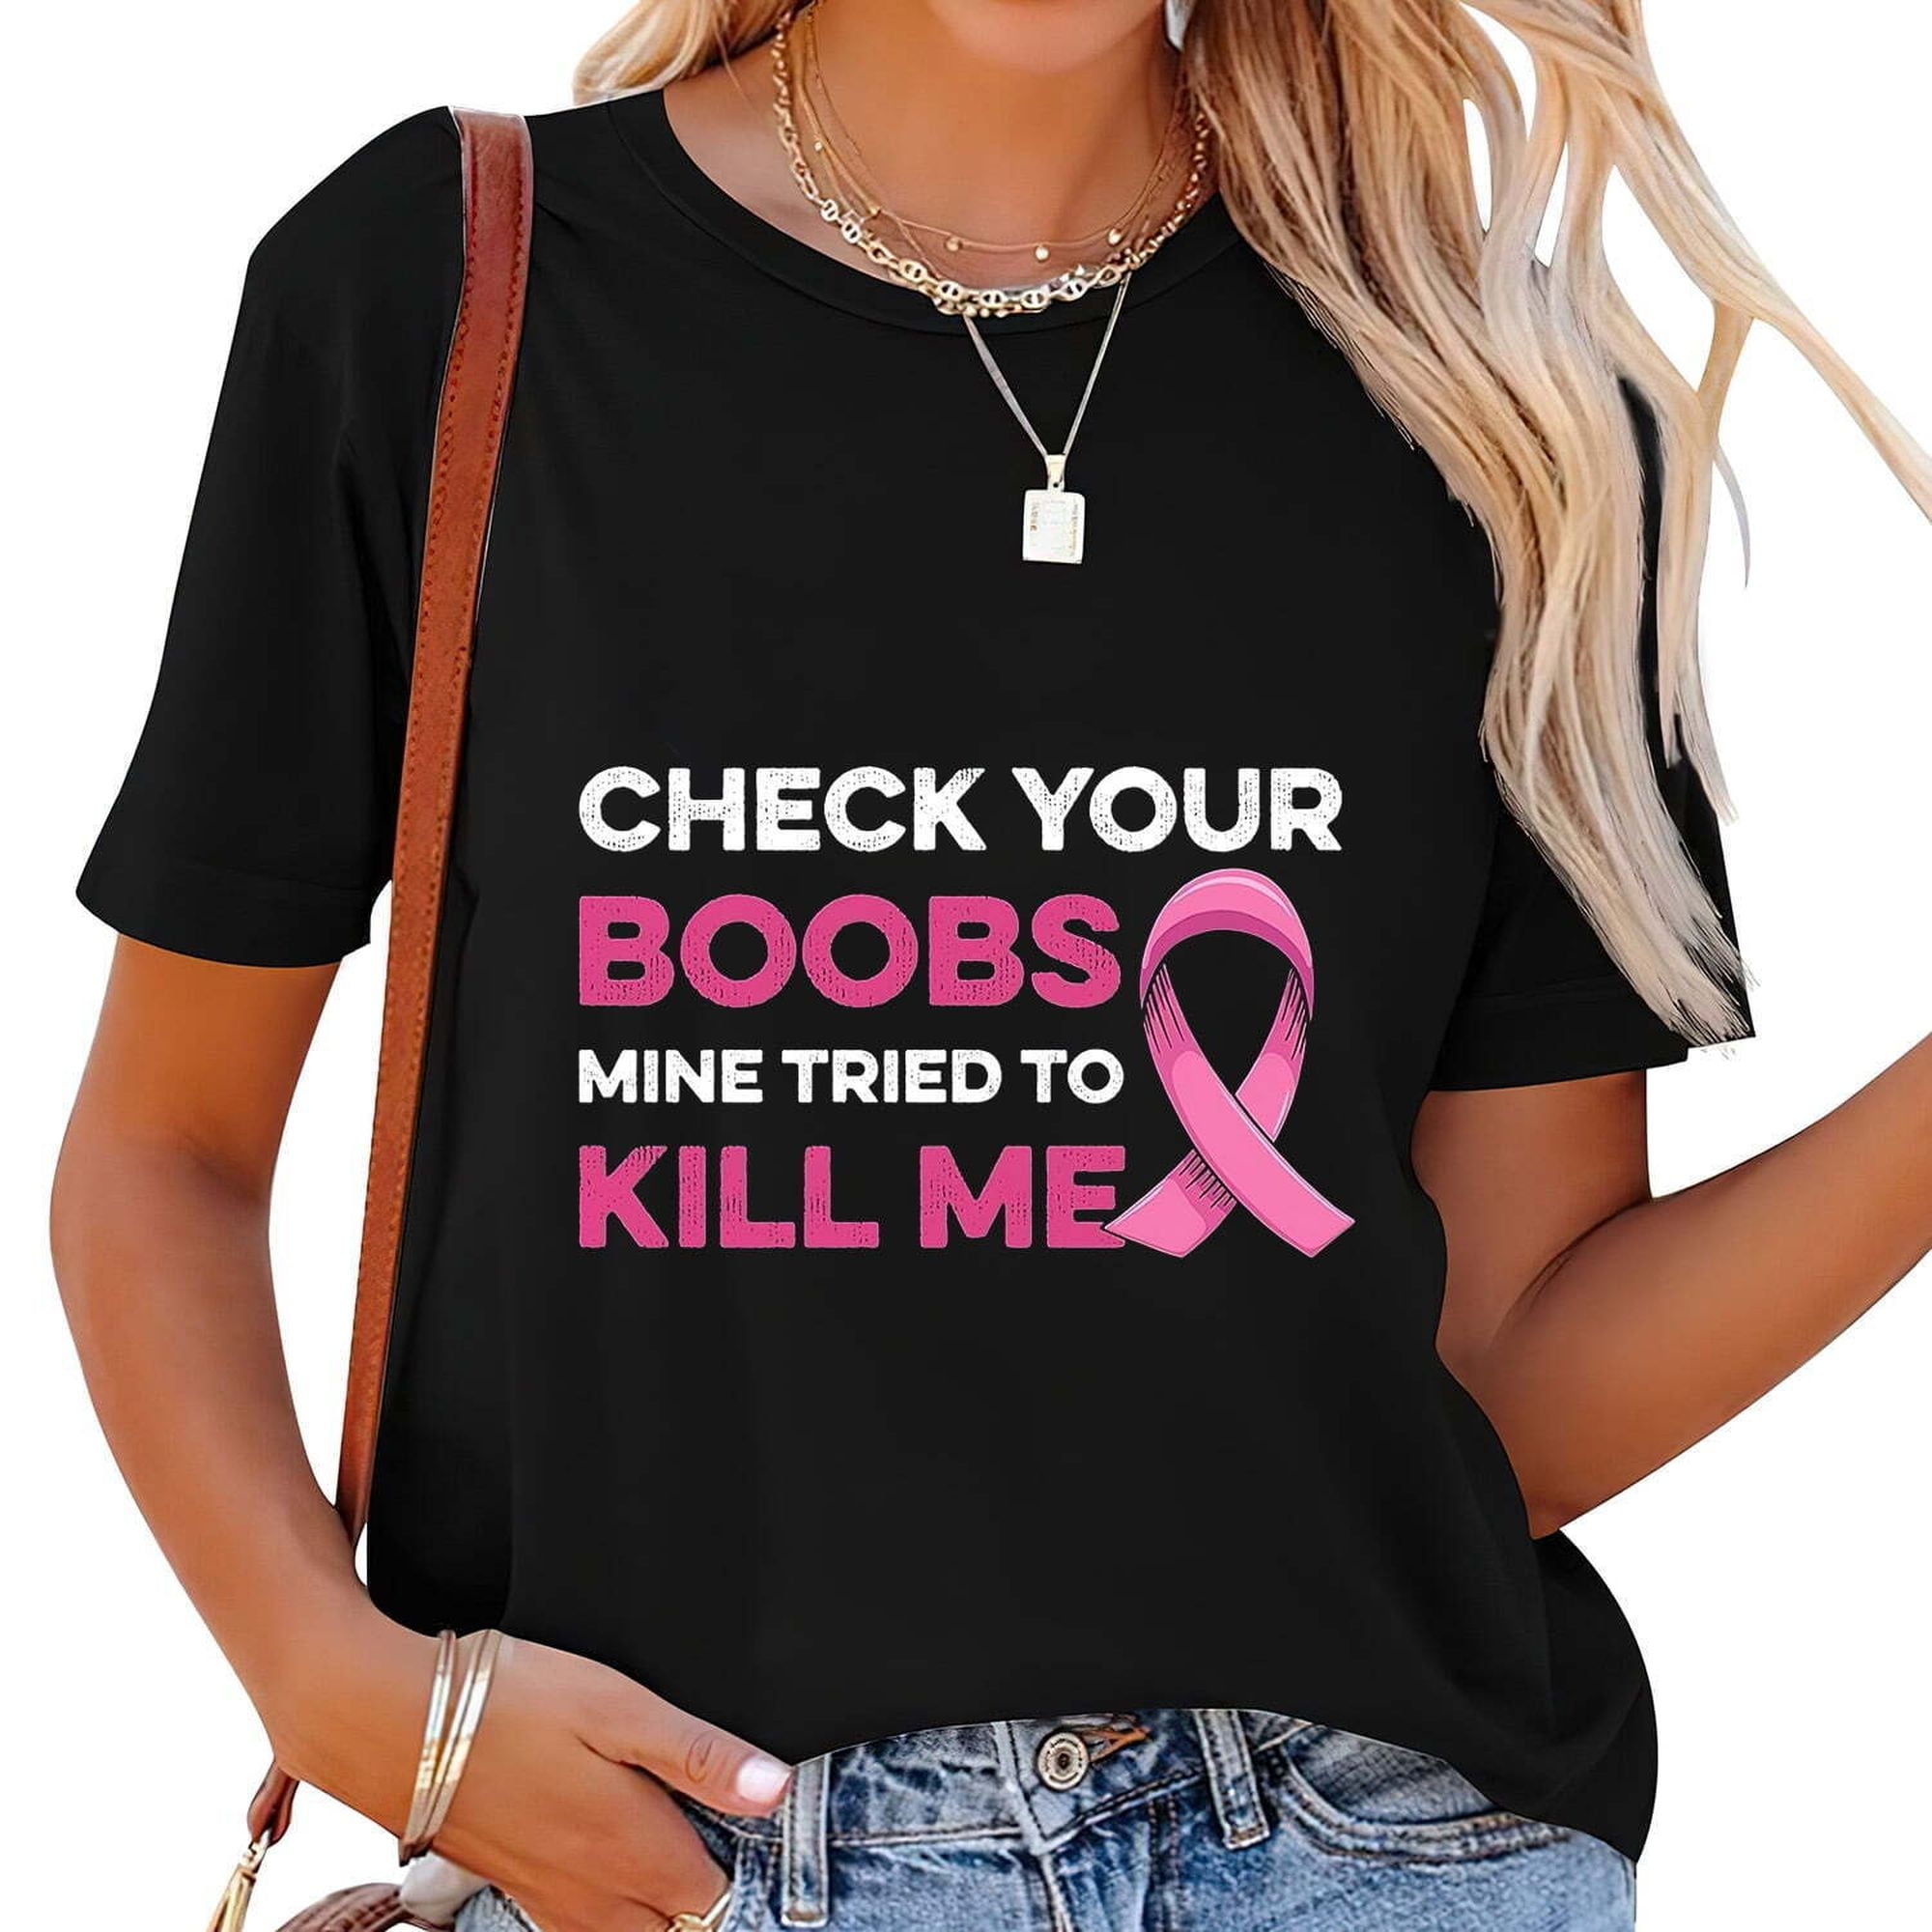 Stay Aware, Save Lives: Empowering Women Against Breast Cancer with ...